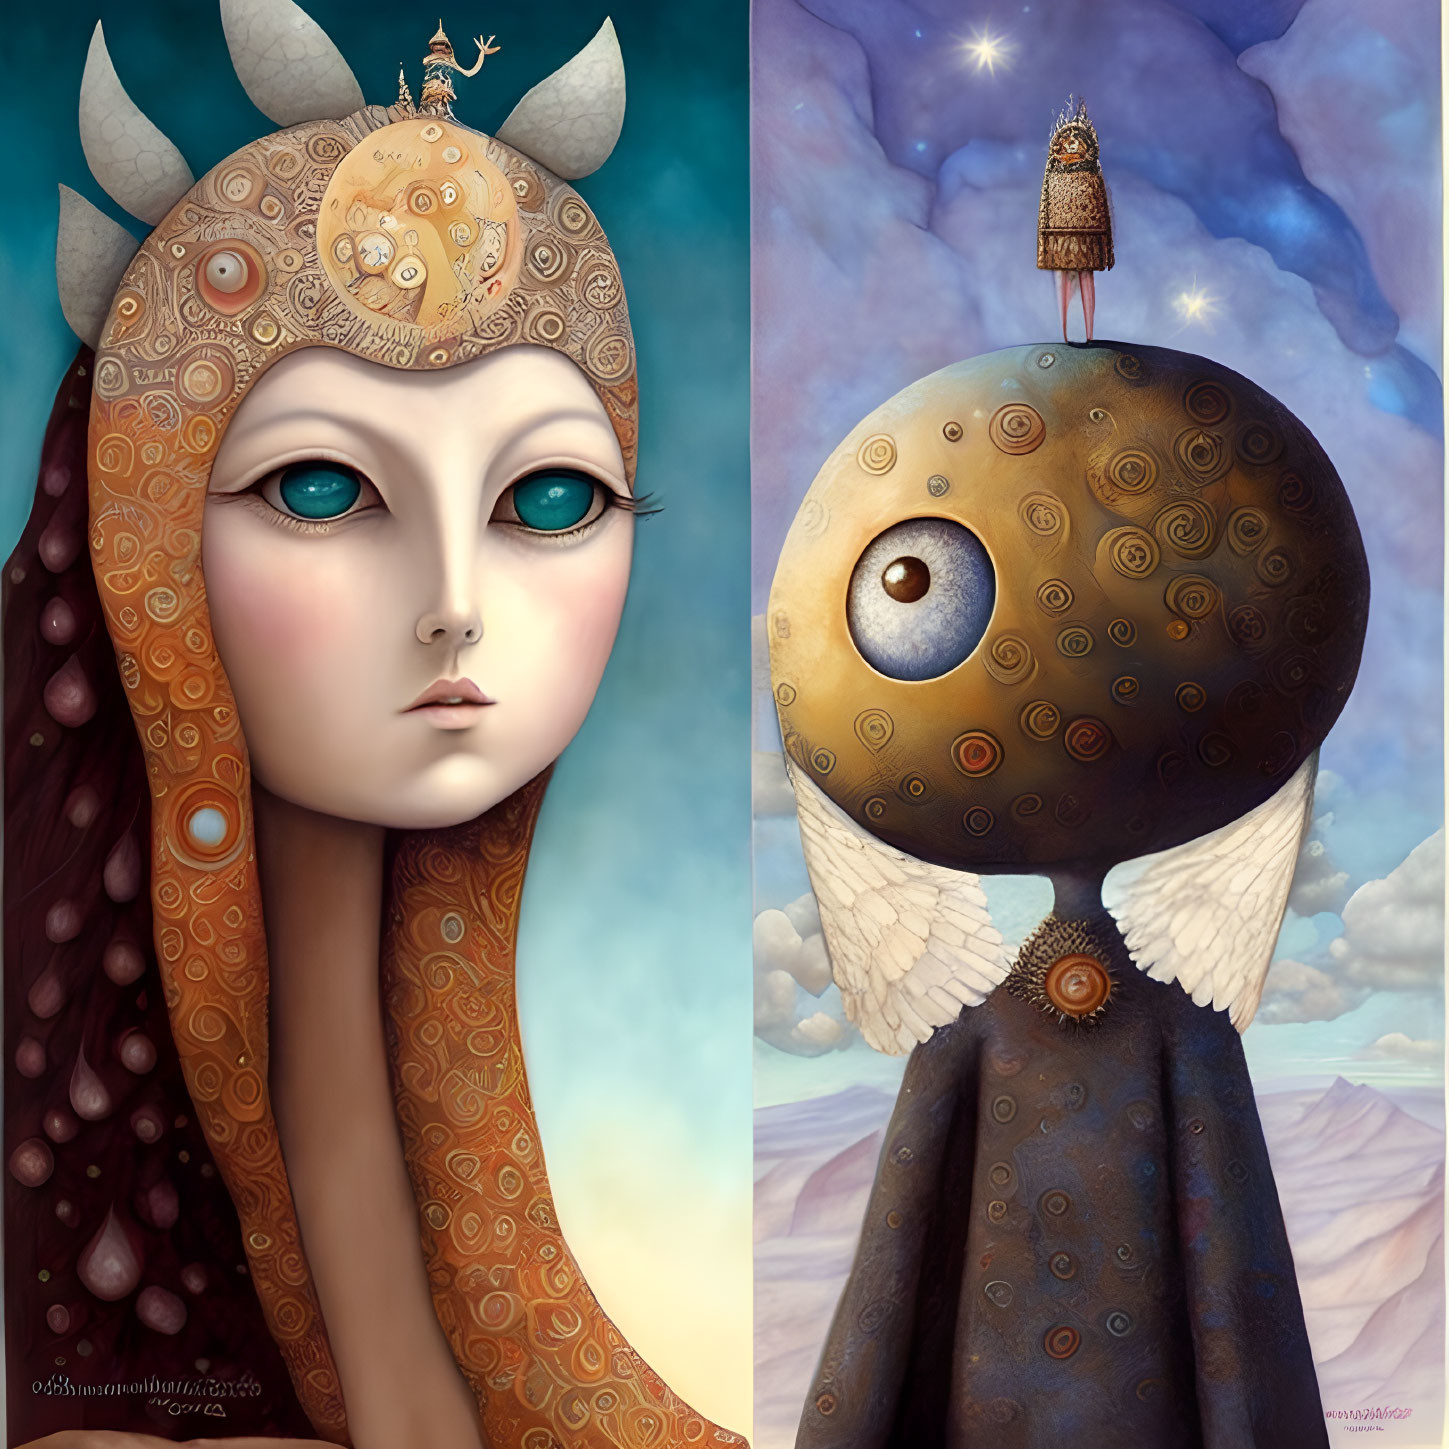 Surreal portraits: Female figure with moon crown & entity with eye head in desert.